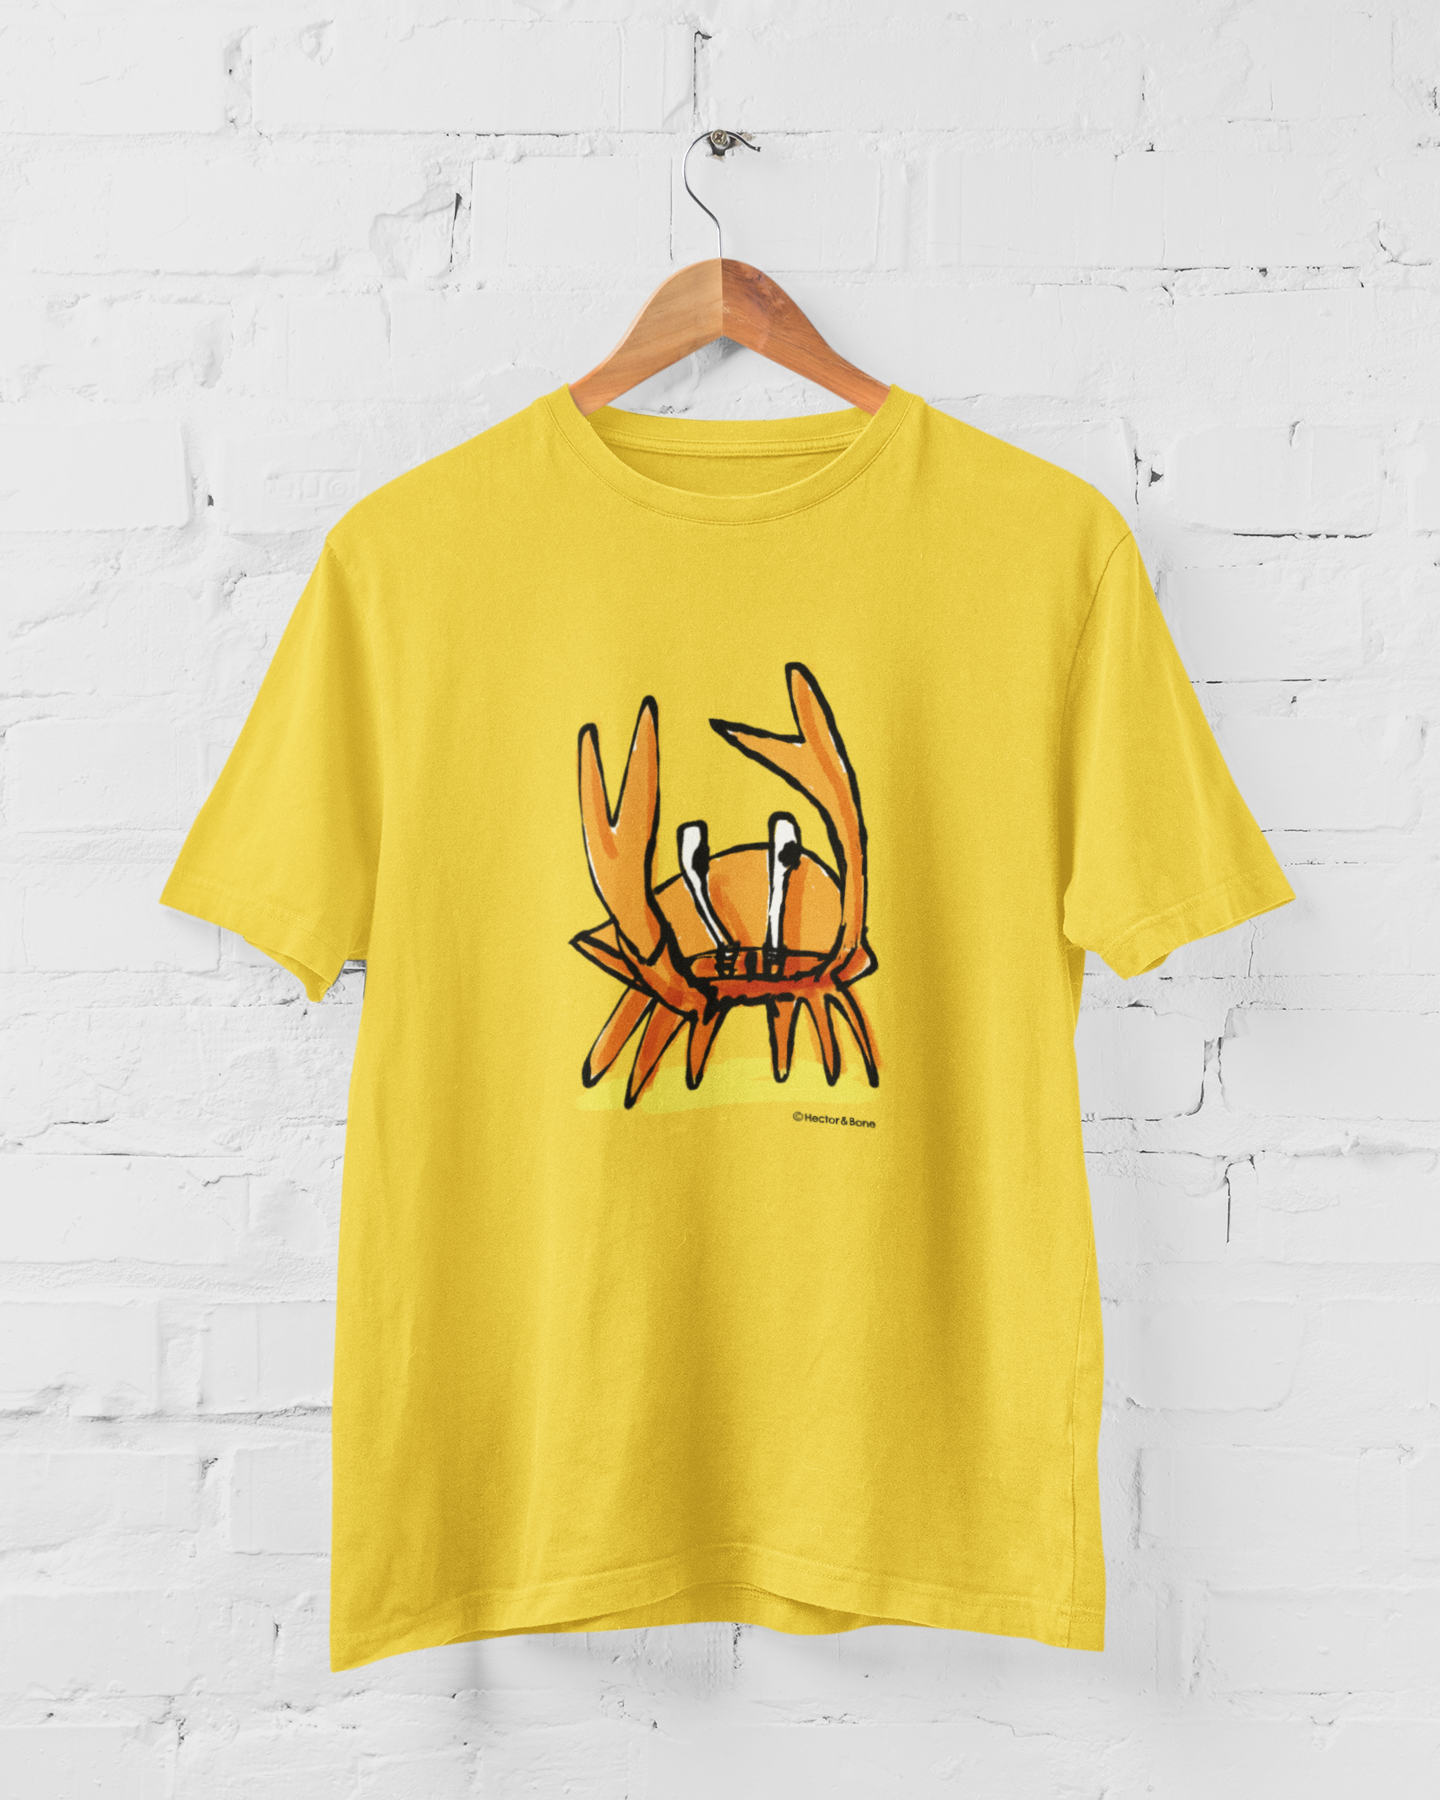 Crab T-shirt - Illustrated funny Angry Crab t-shirts printed on golden yellow colour vegan cotton by Hector and Bone